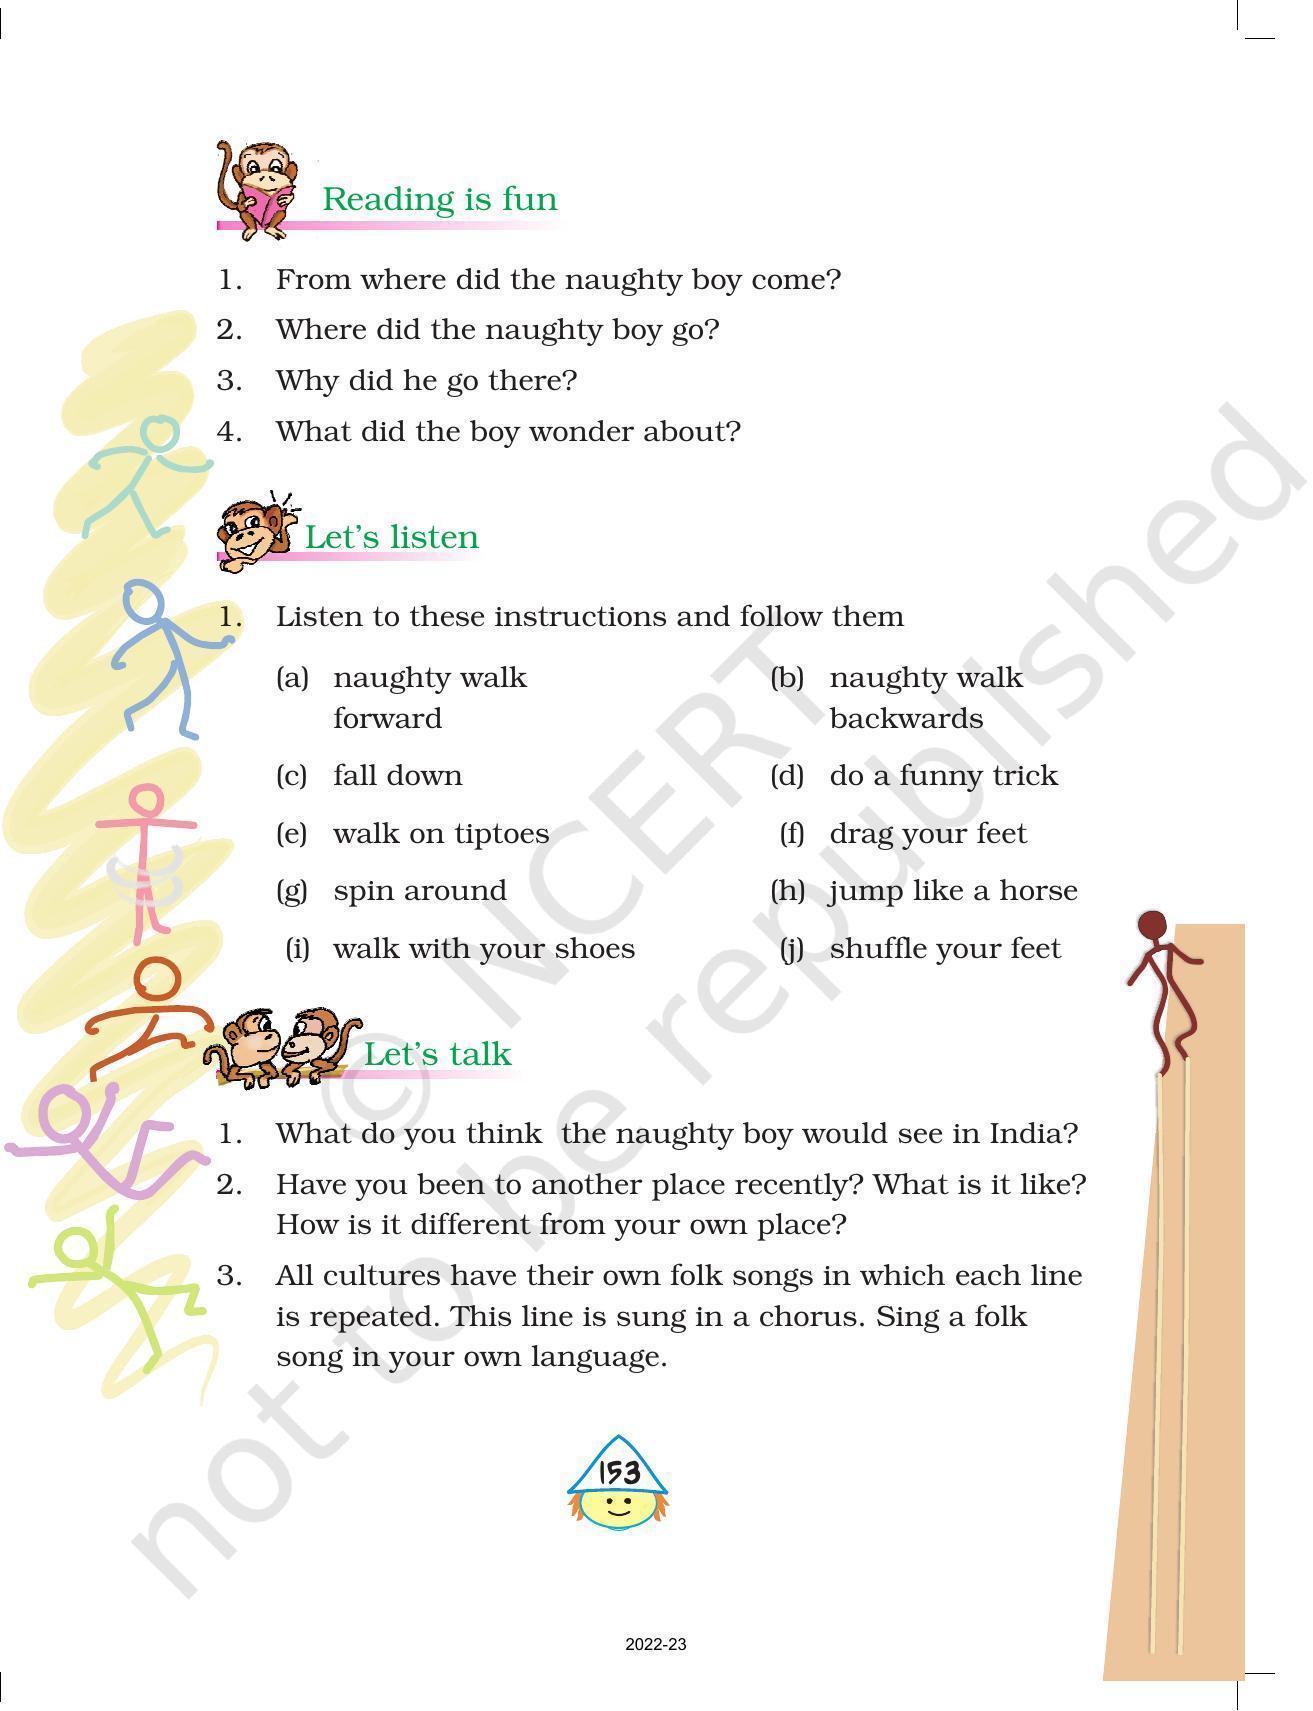 NCERT Book for Class 4 English (Poem): Chapter 17-The Naughty Boy - Page 4